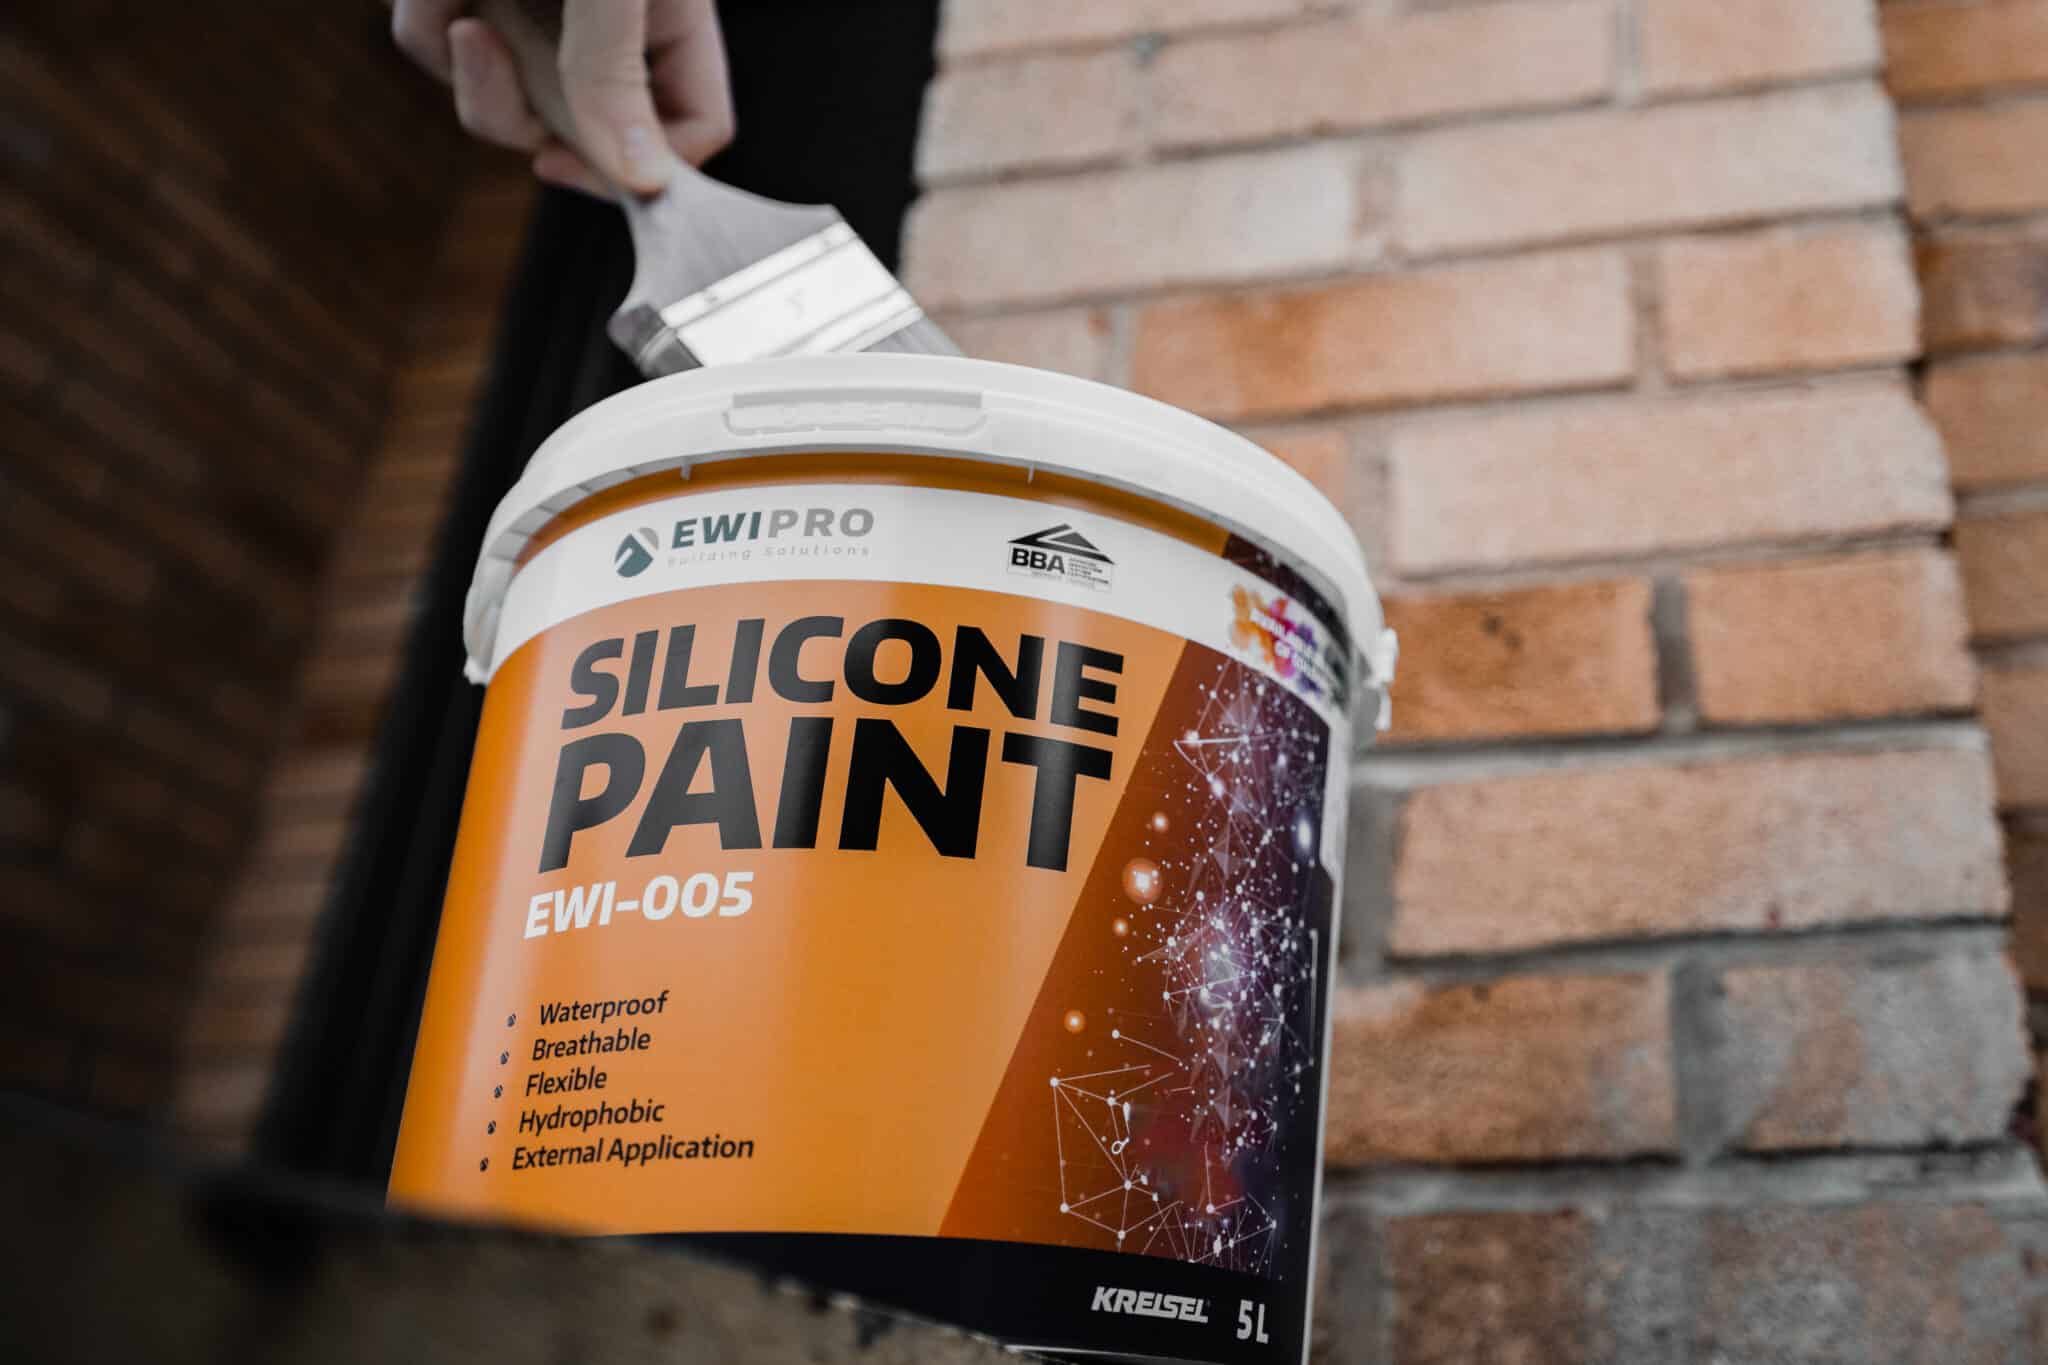 Is Silicone Paint Good?